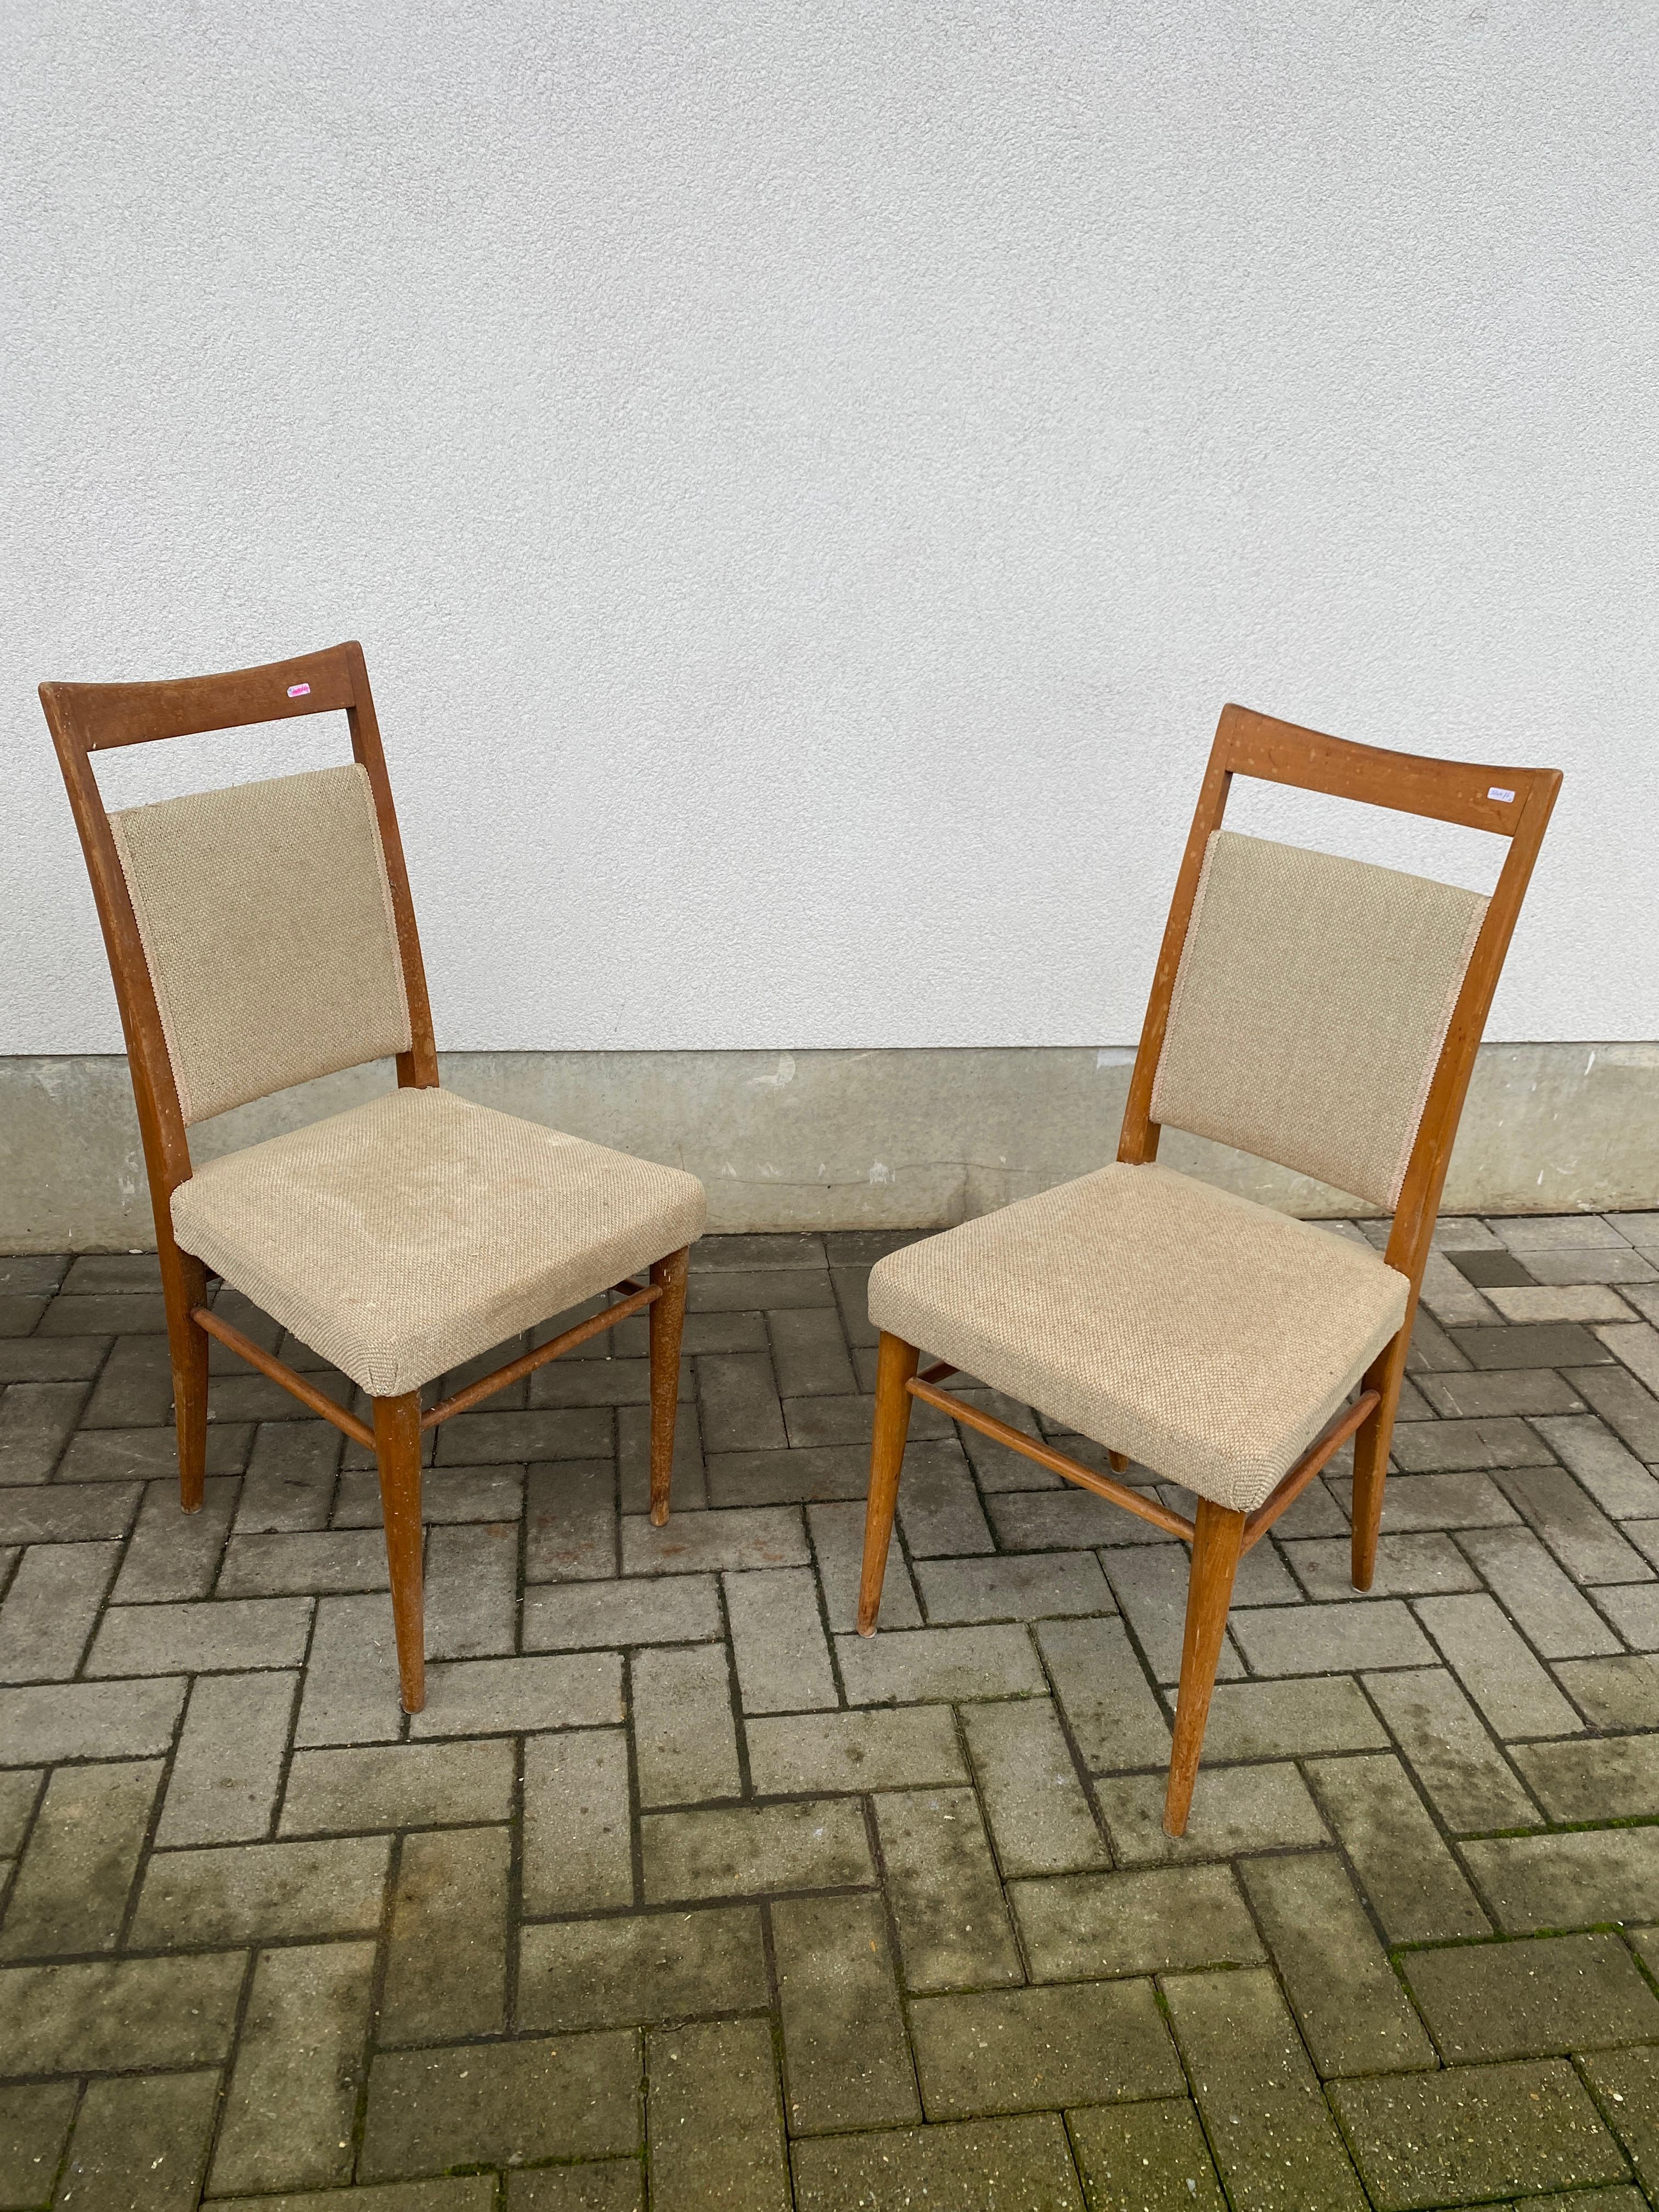 Mid-20th Century suite of 6 chairs circa 1950/1960 patina and fabric to be redone For Sale